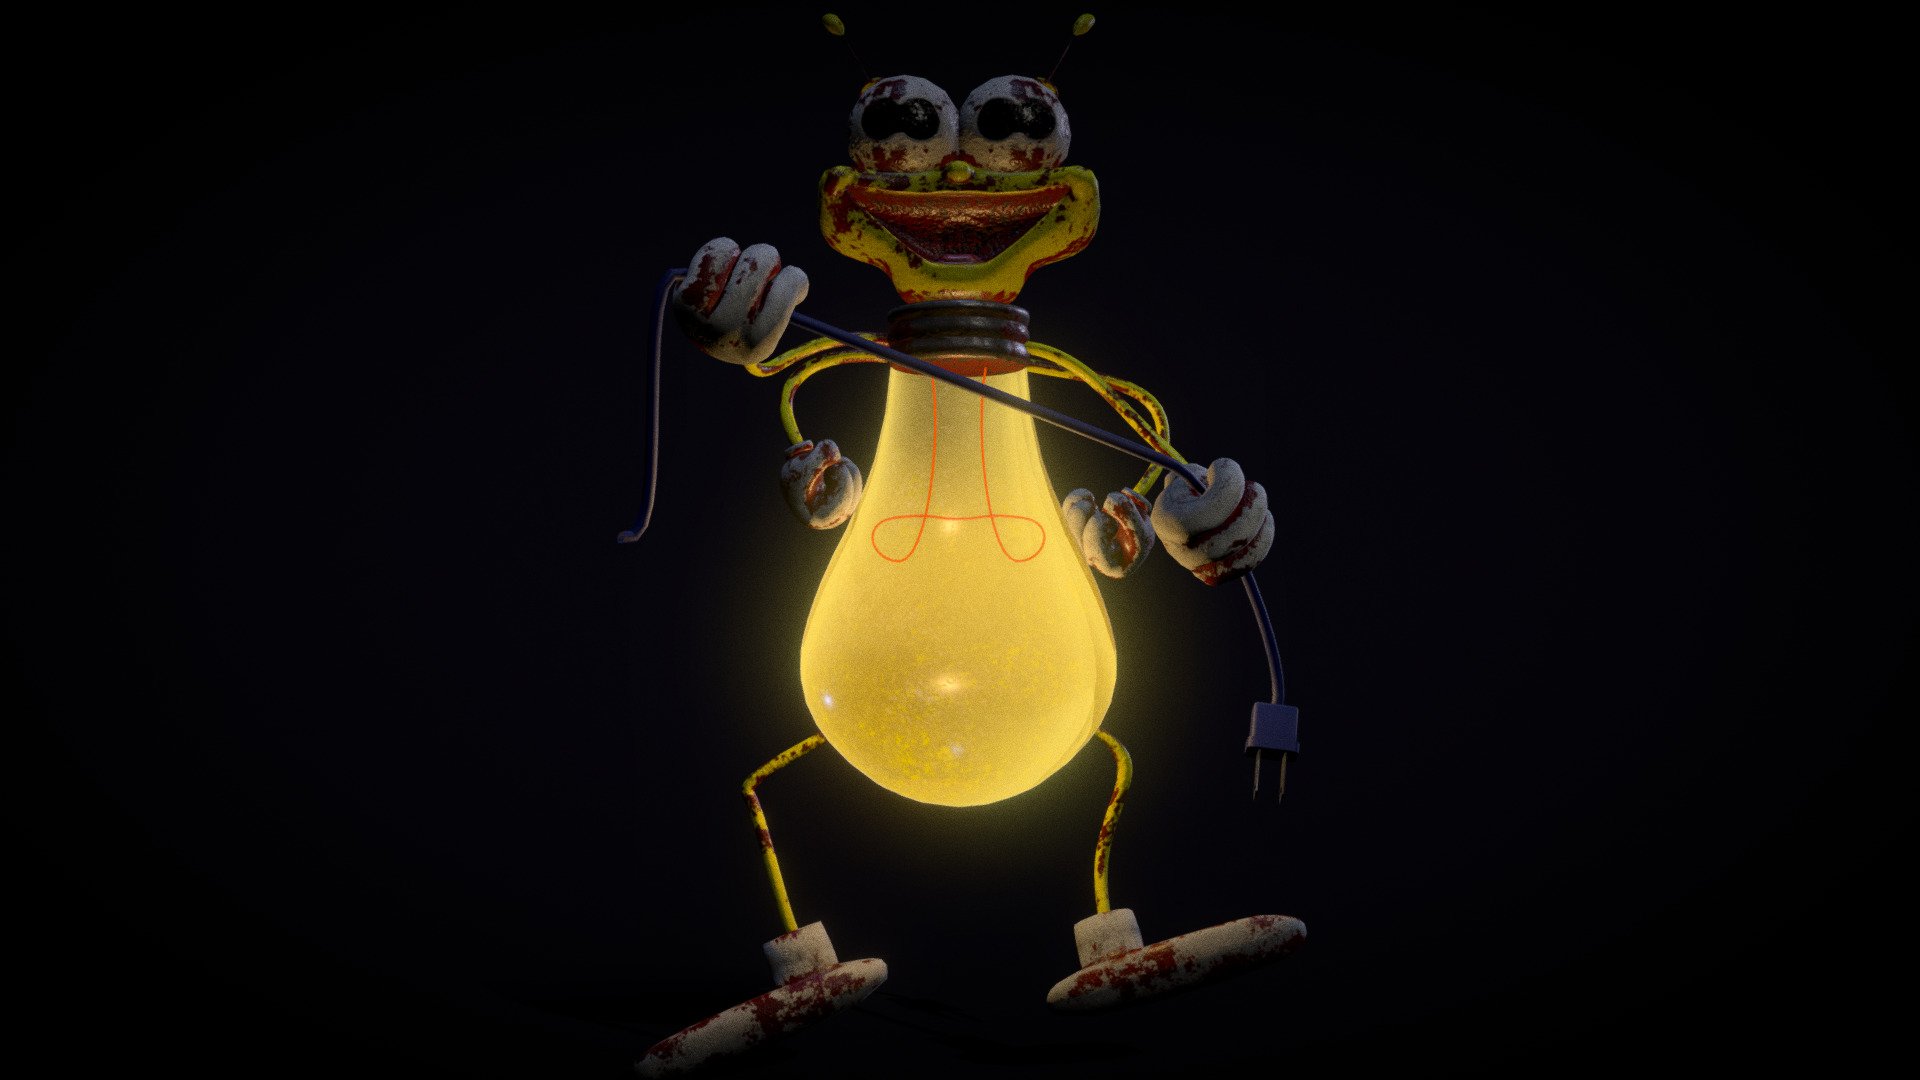 The mascot character for Alabama Power &amp; other power companies, created to teach children about electrical safety.
I covered him in blood and made him spooky because it's almost halloween.

Created for Day 26 of the #Sculptober 2021 Challenge 3d model